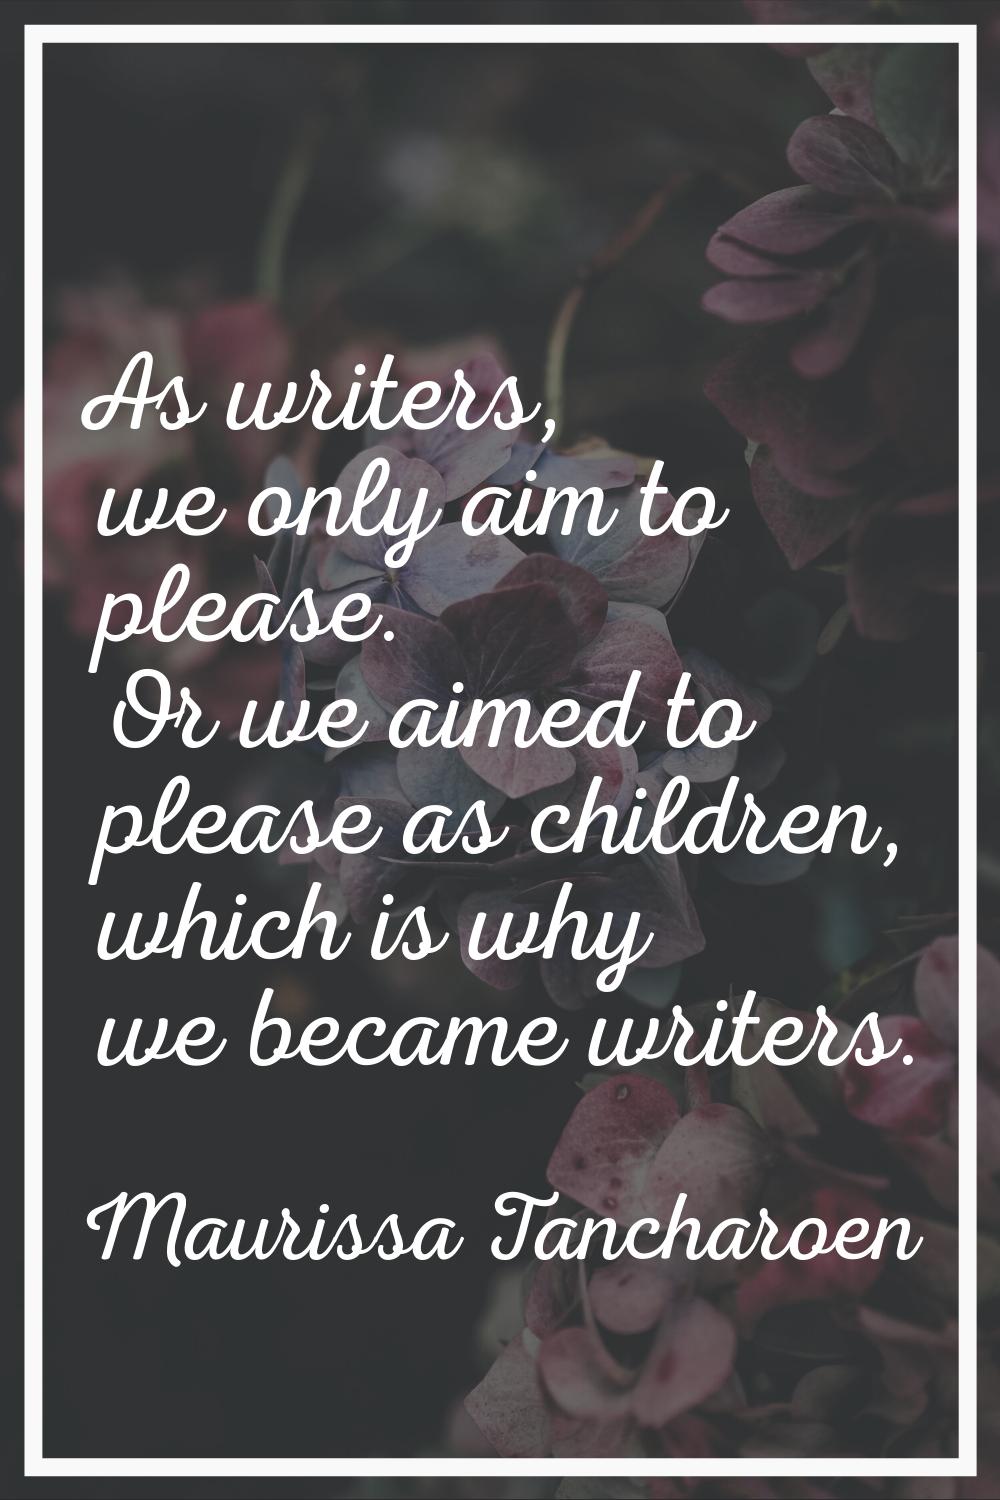 As writers, we only aim to please. Or we aimed to please as children, which is why we became writer